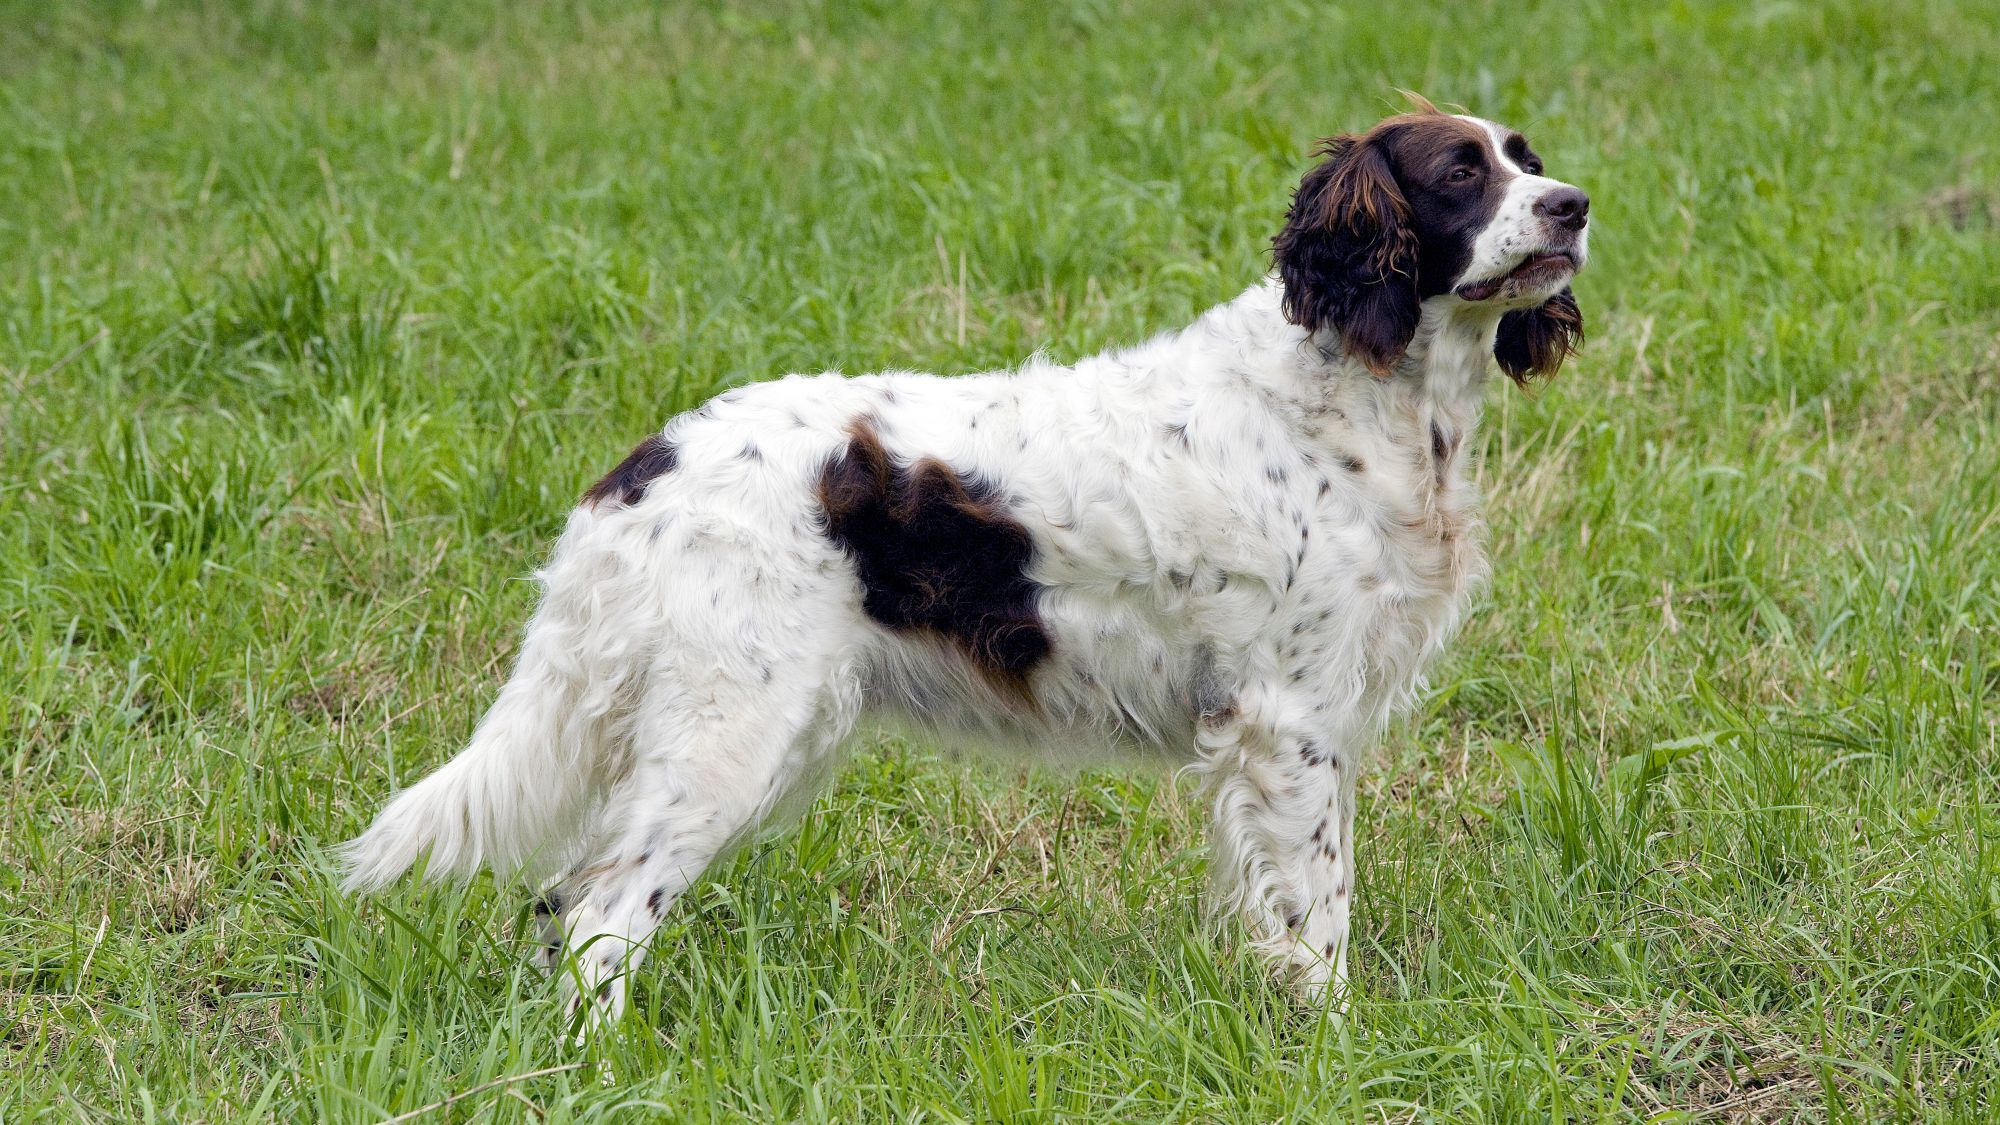 Black and white French Spaniel stood alert in grass